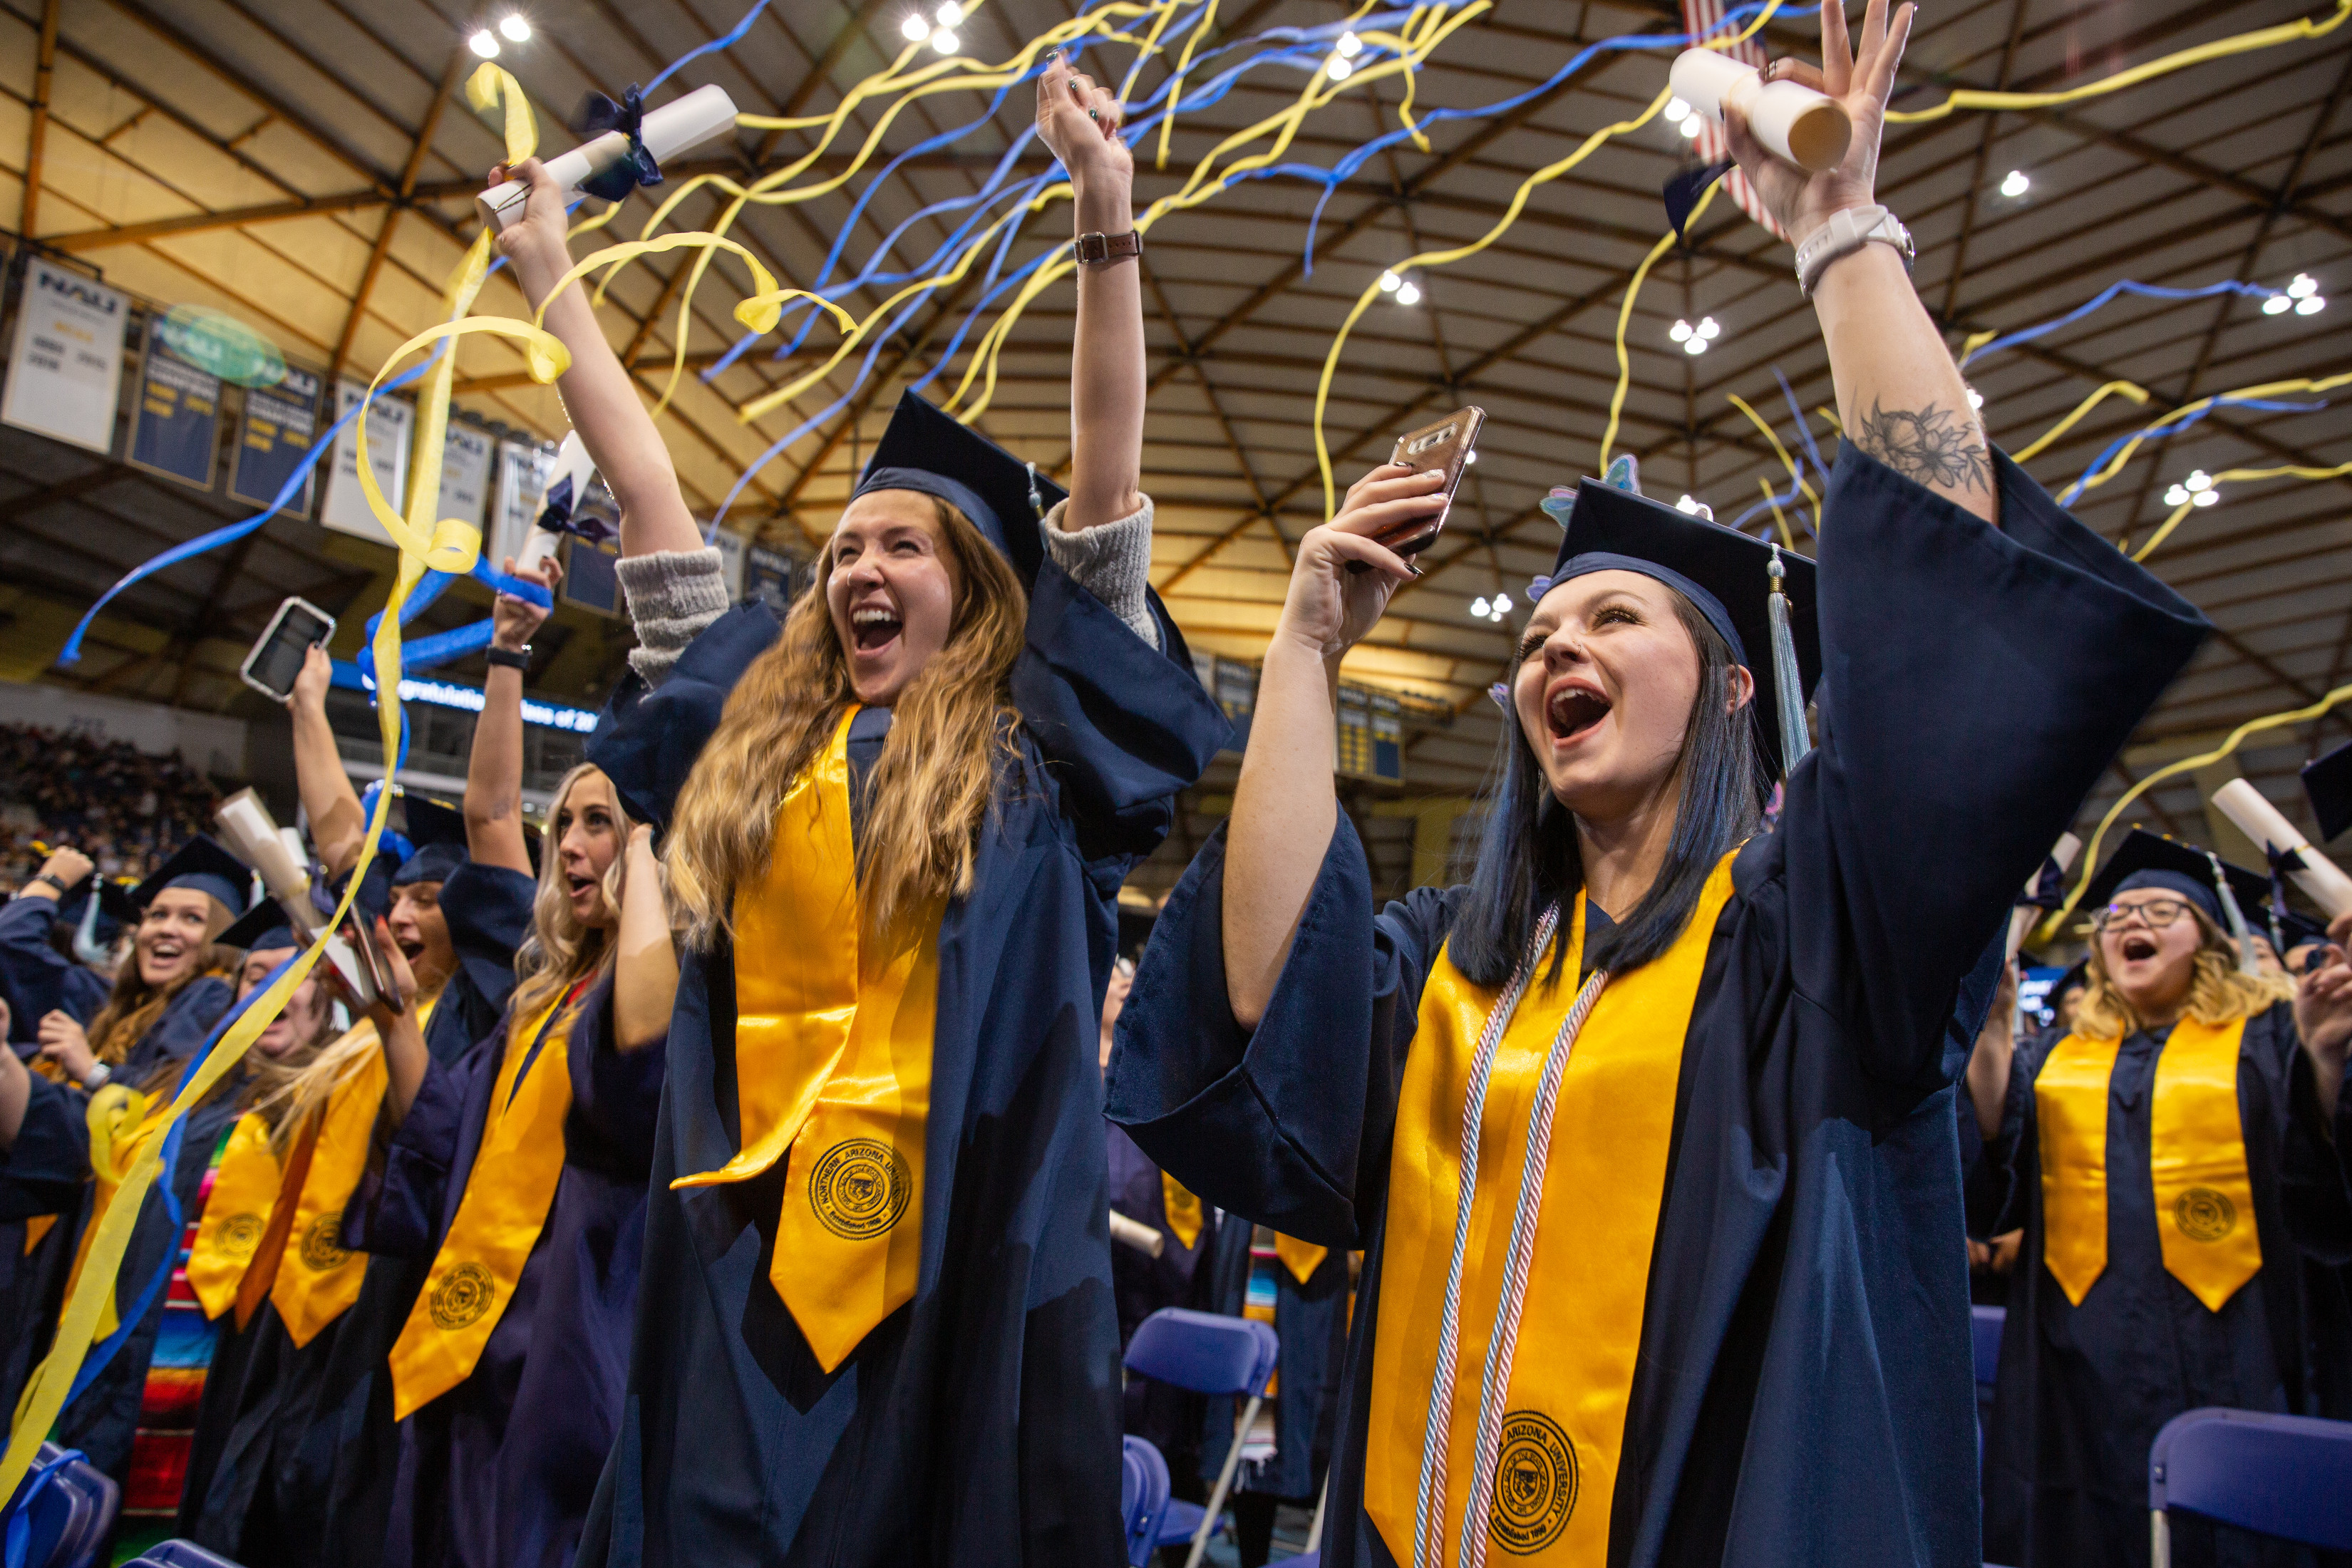 Students in their cap and gown jump for joy at commencement.